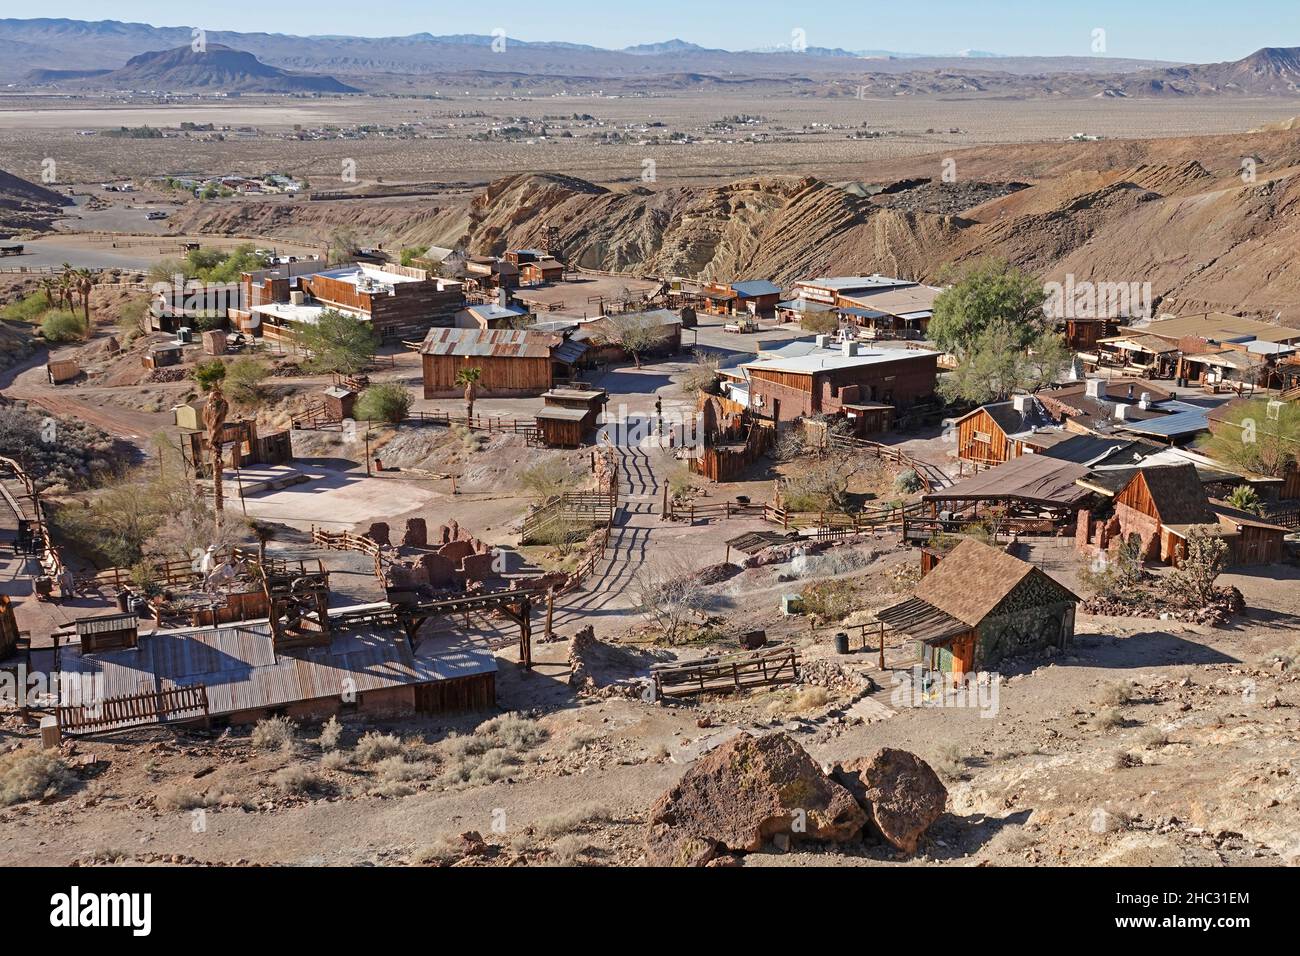 Calico, California / USA - Jan. 11, 2020: The historic, rugged silver mining ghost town in the Mojave Desert is shown from an elevated view. Stock Photo